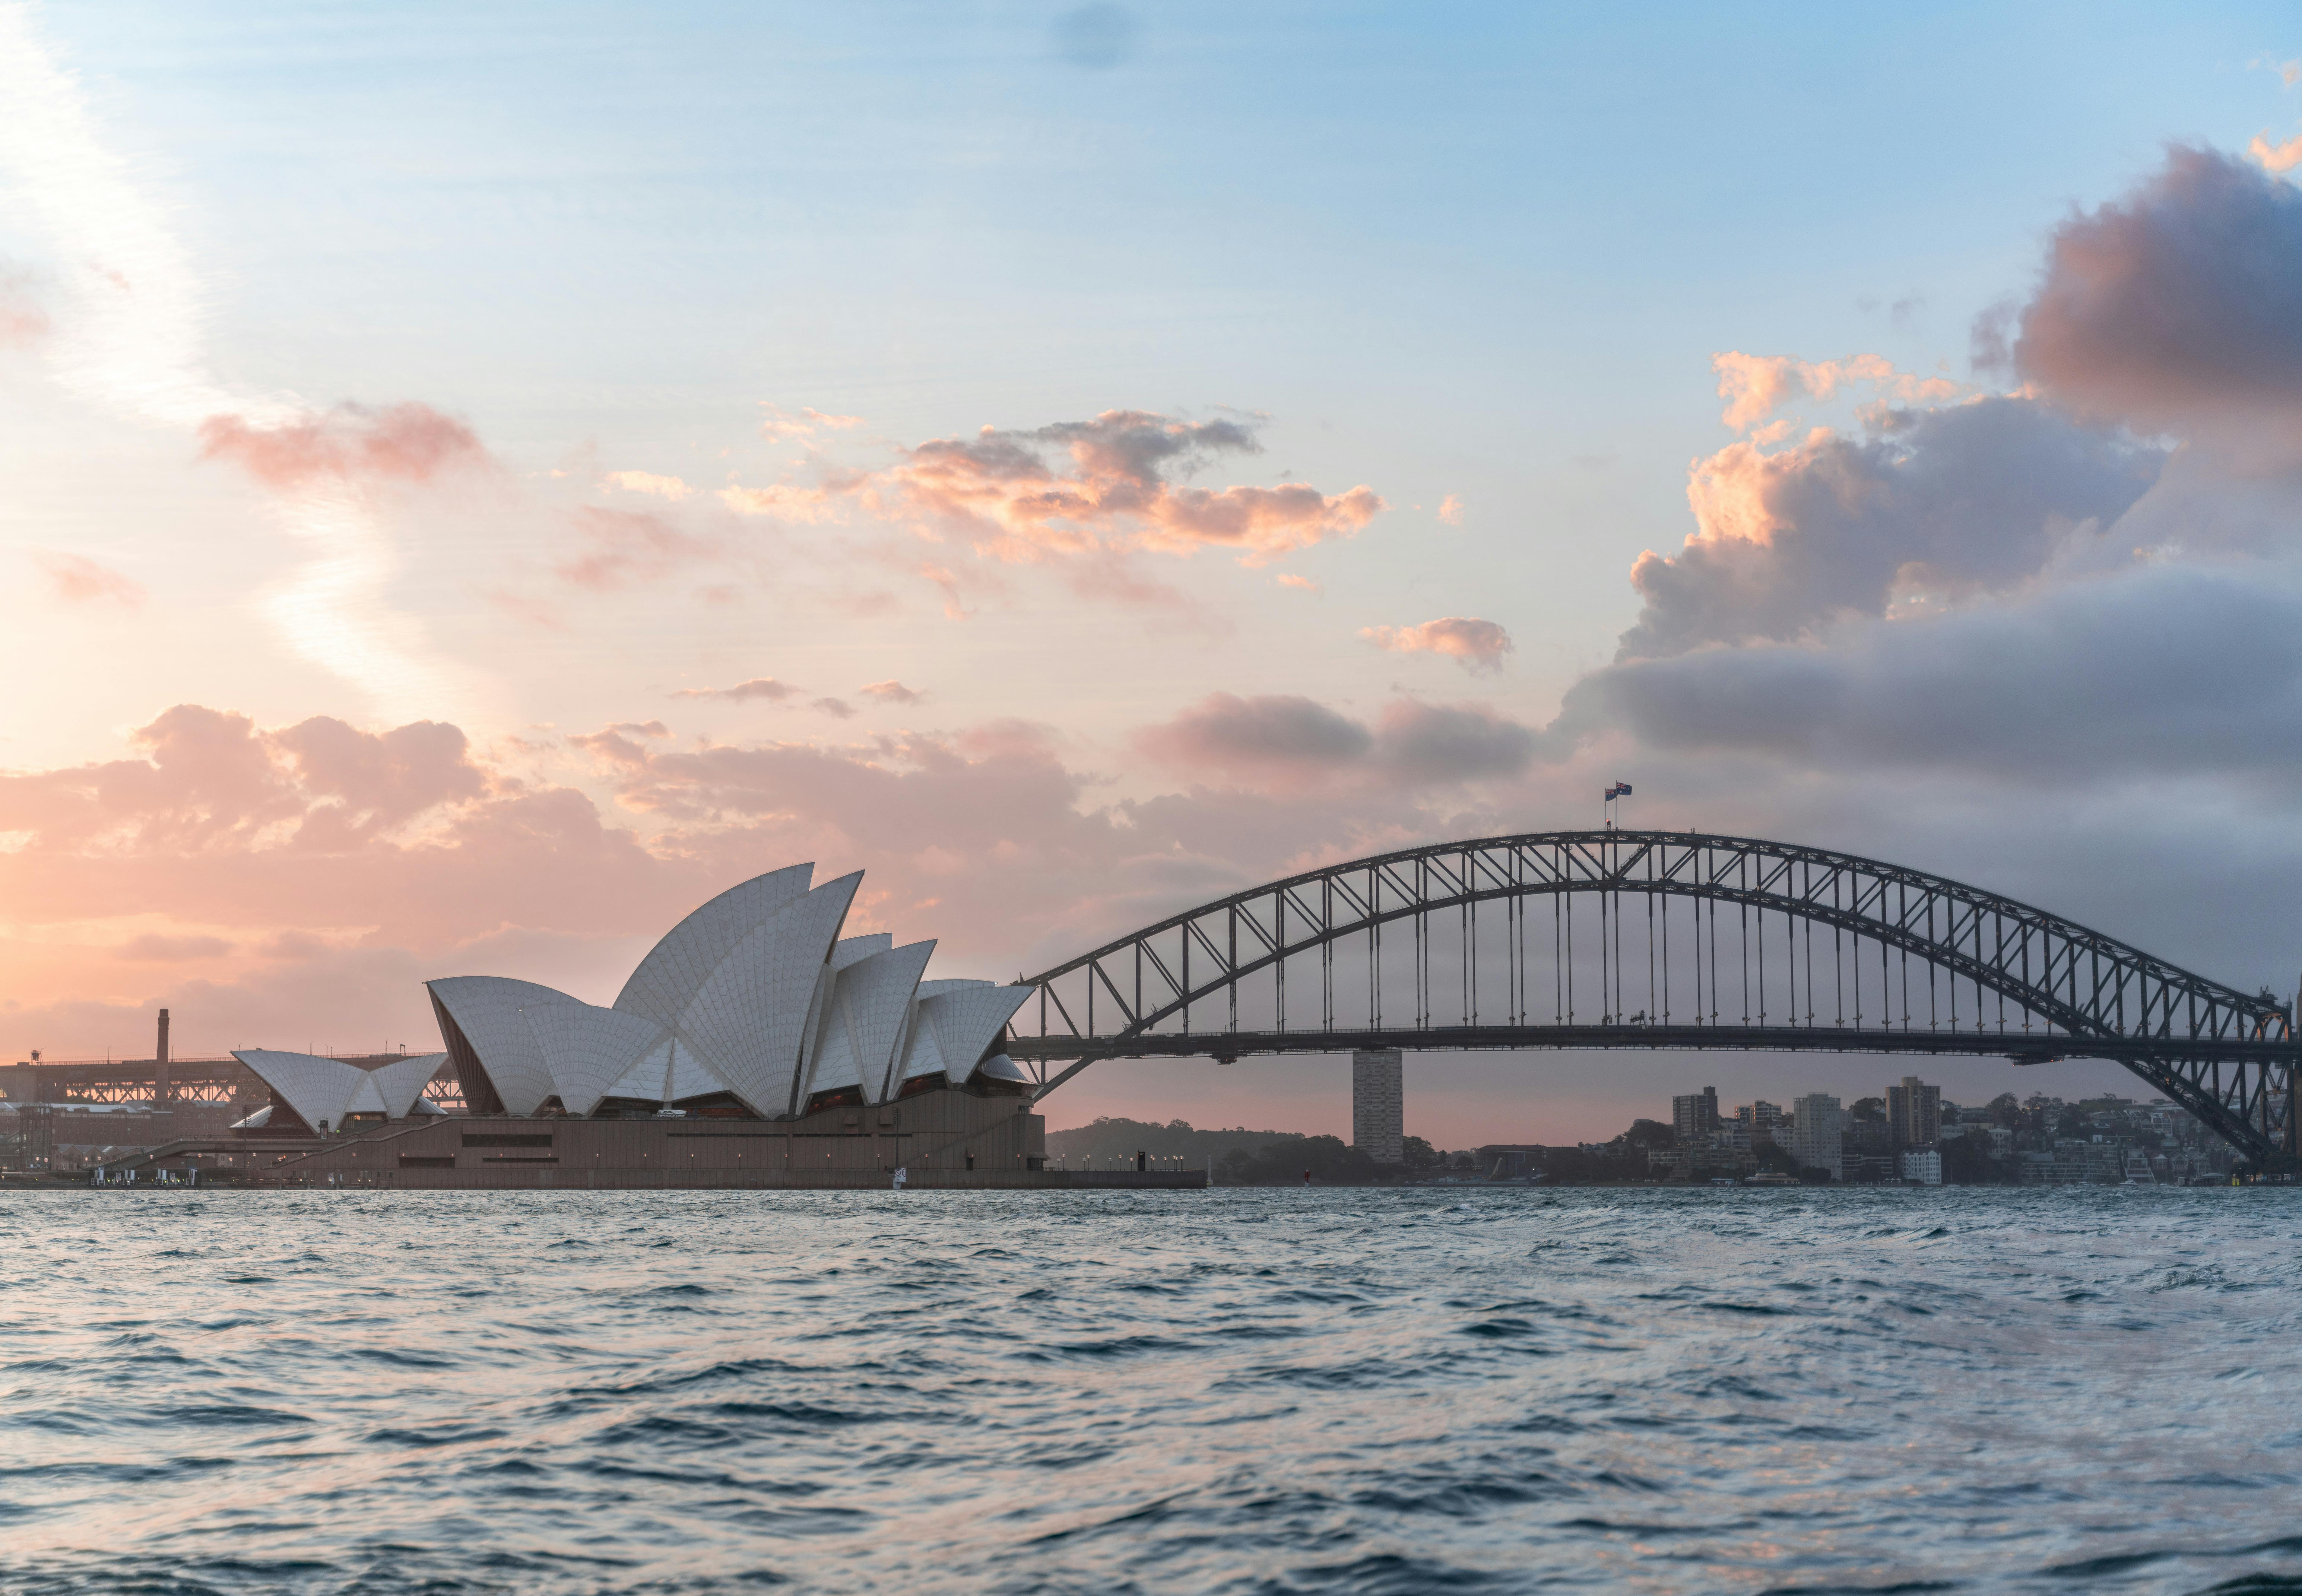 Early-stage decarbonization for Australia and New Zealand